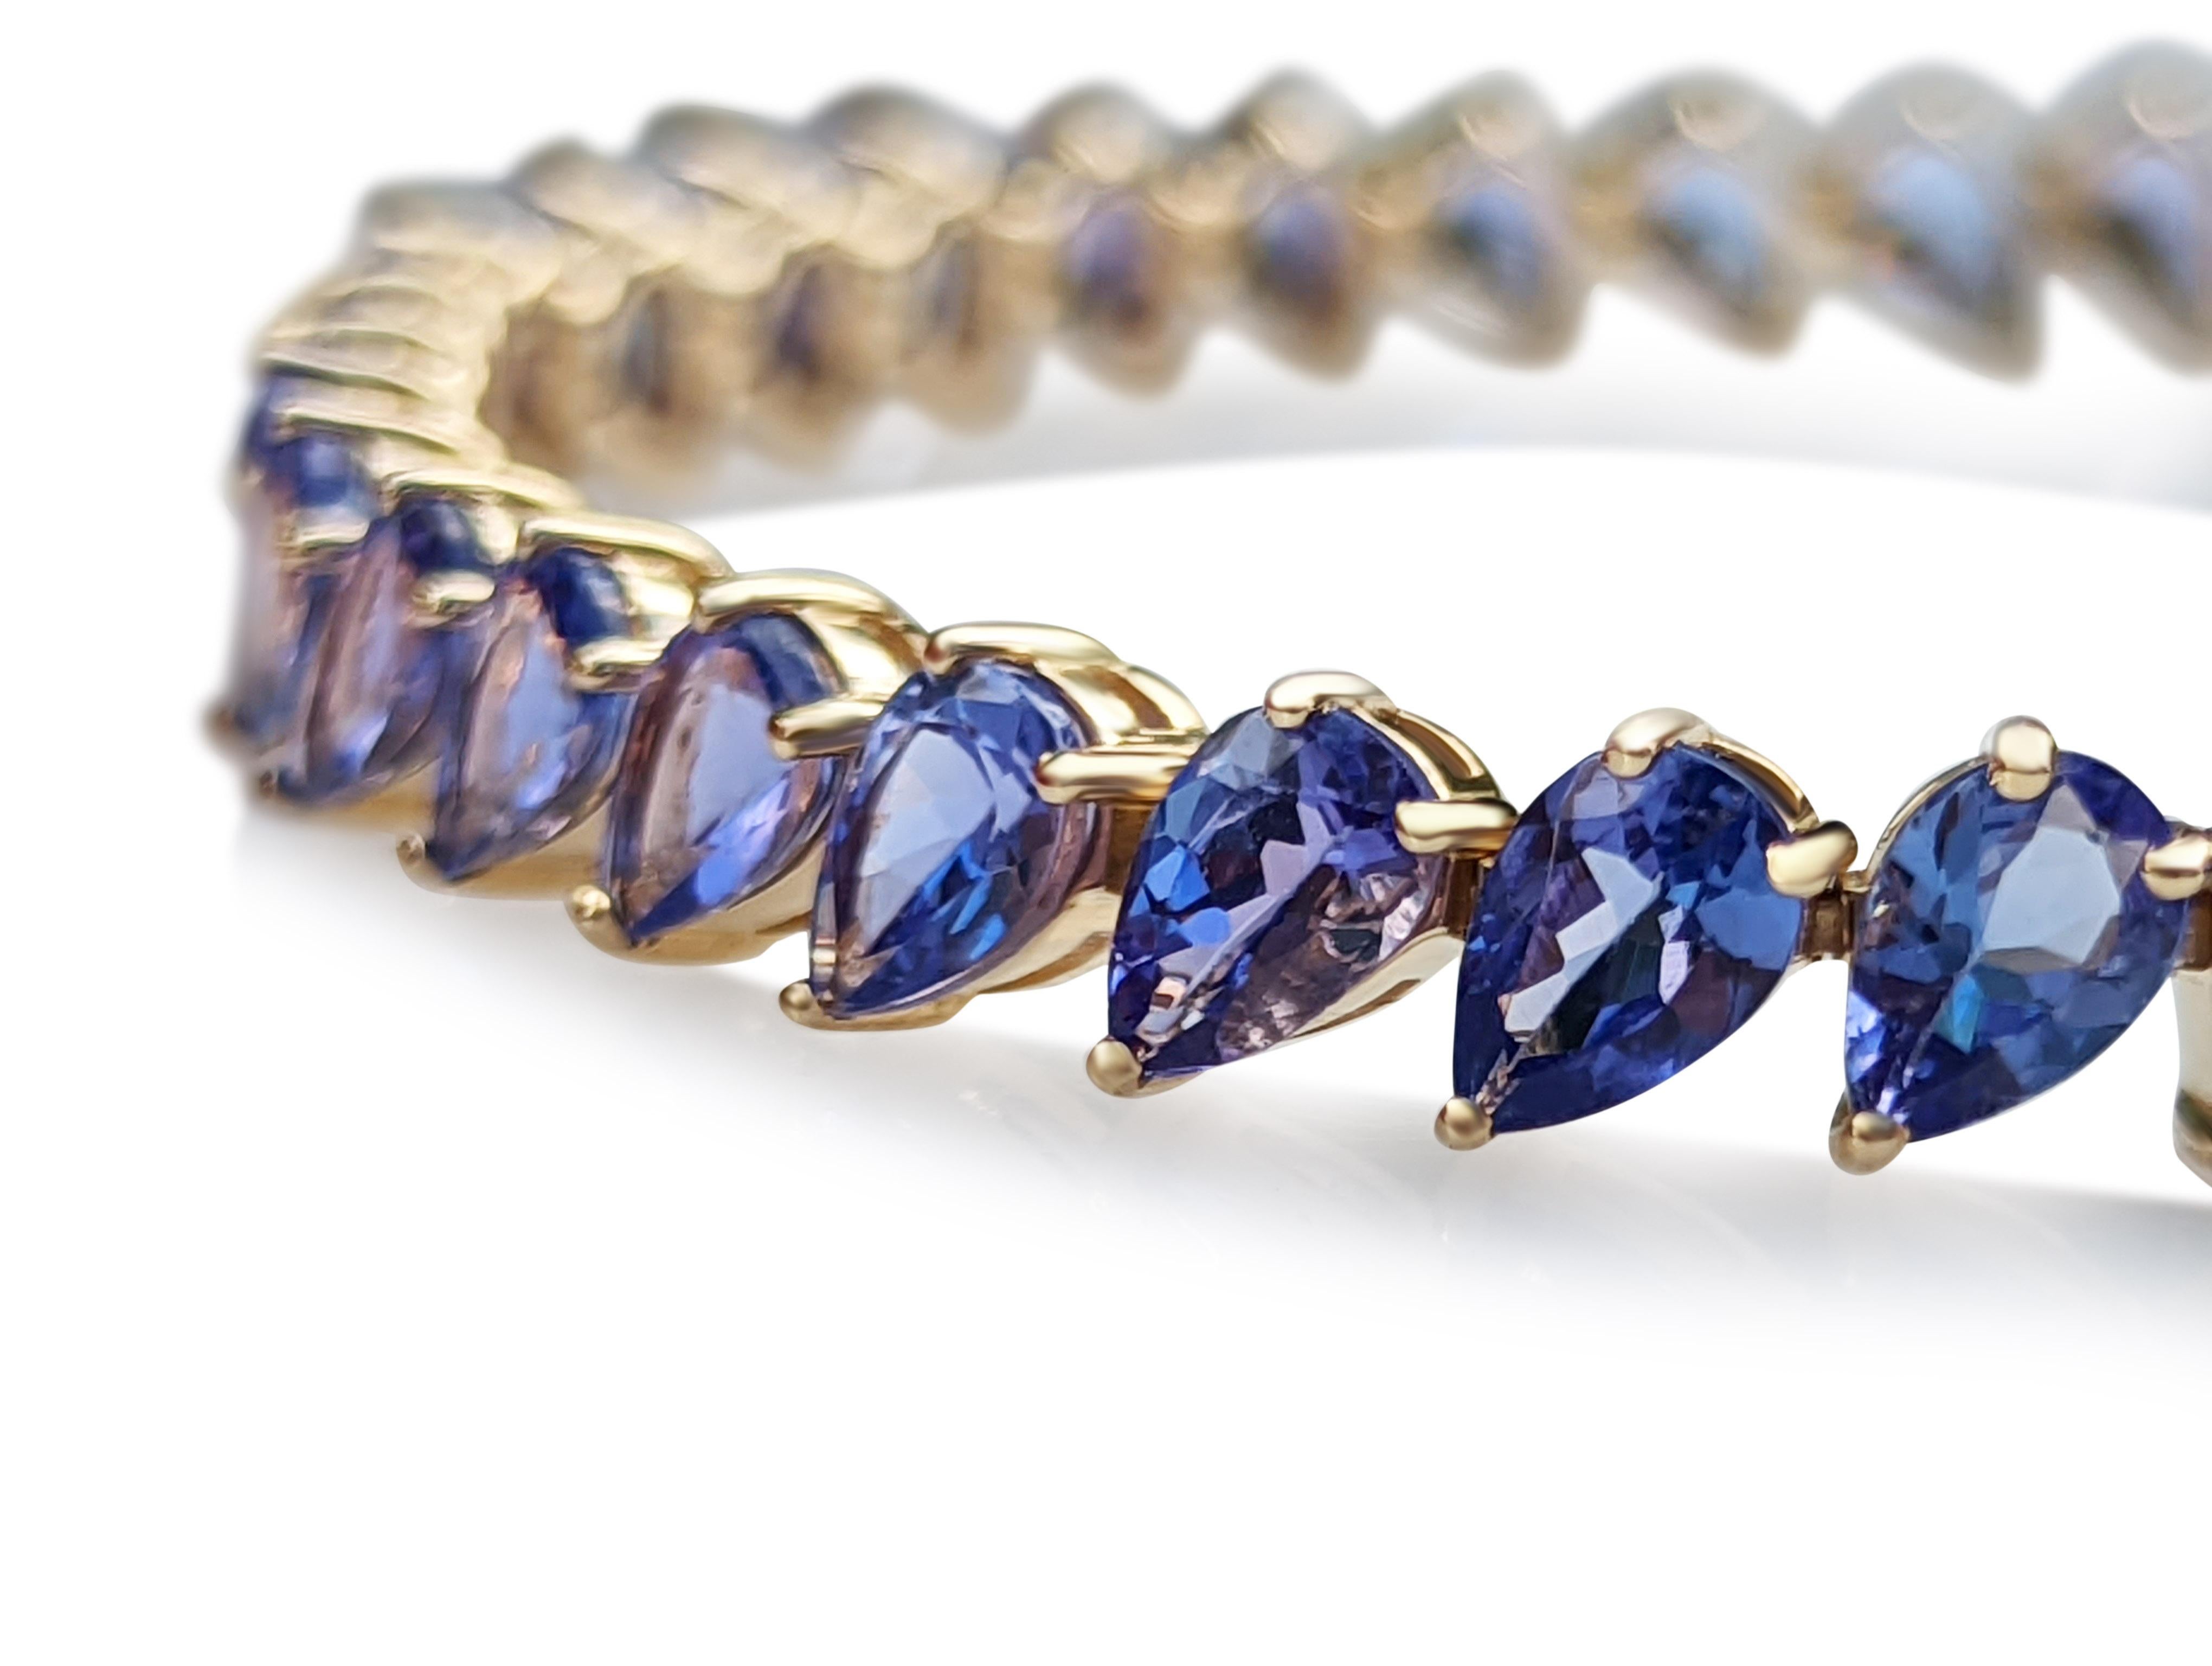 A truly one of a kind natural Tanzanite bracelet, set with 40 pear mixed cut tanzanite stones of 14.75 total carat weight!
The bracelet will stand out in any occasion and is a wonderful gift for yourself or your loved one.
Only 1 in stock - NO